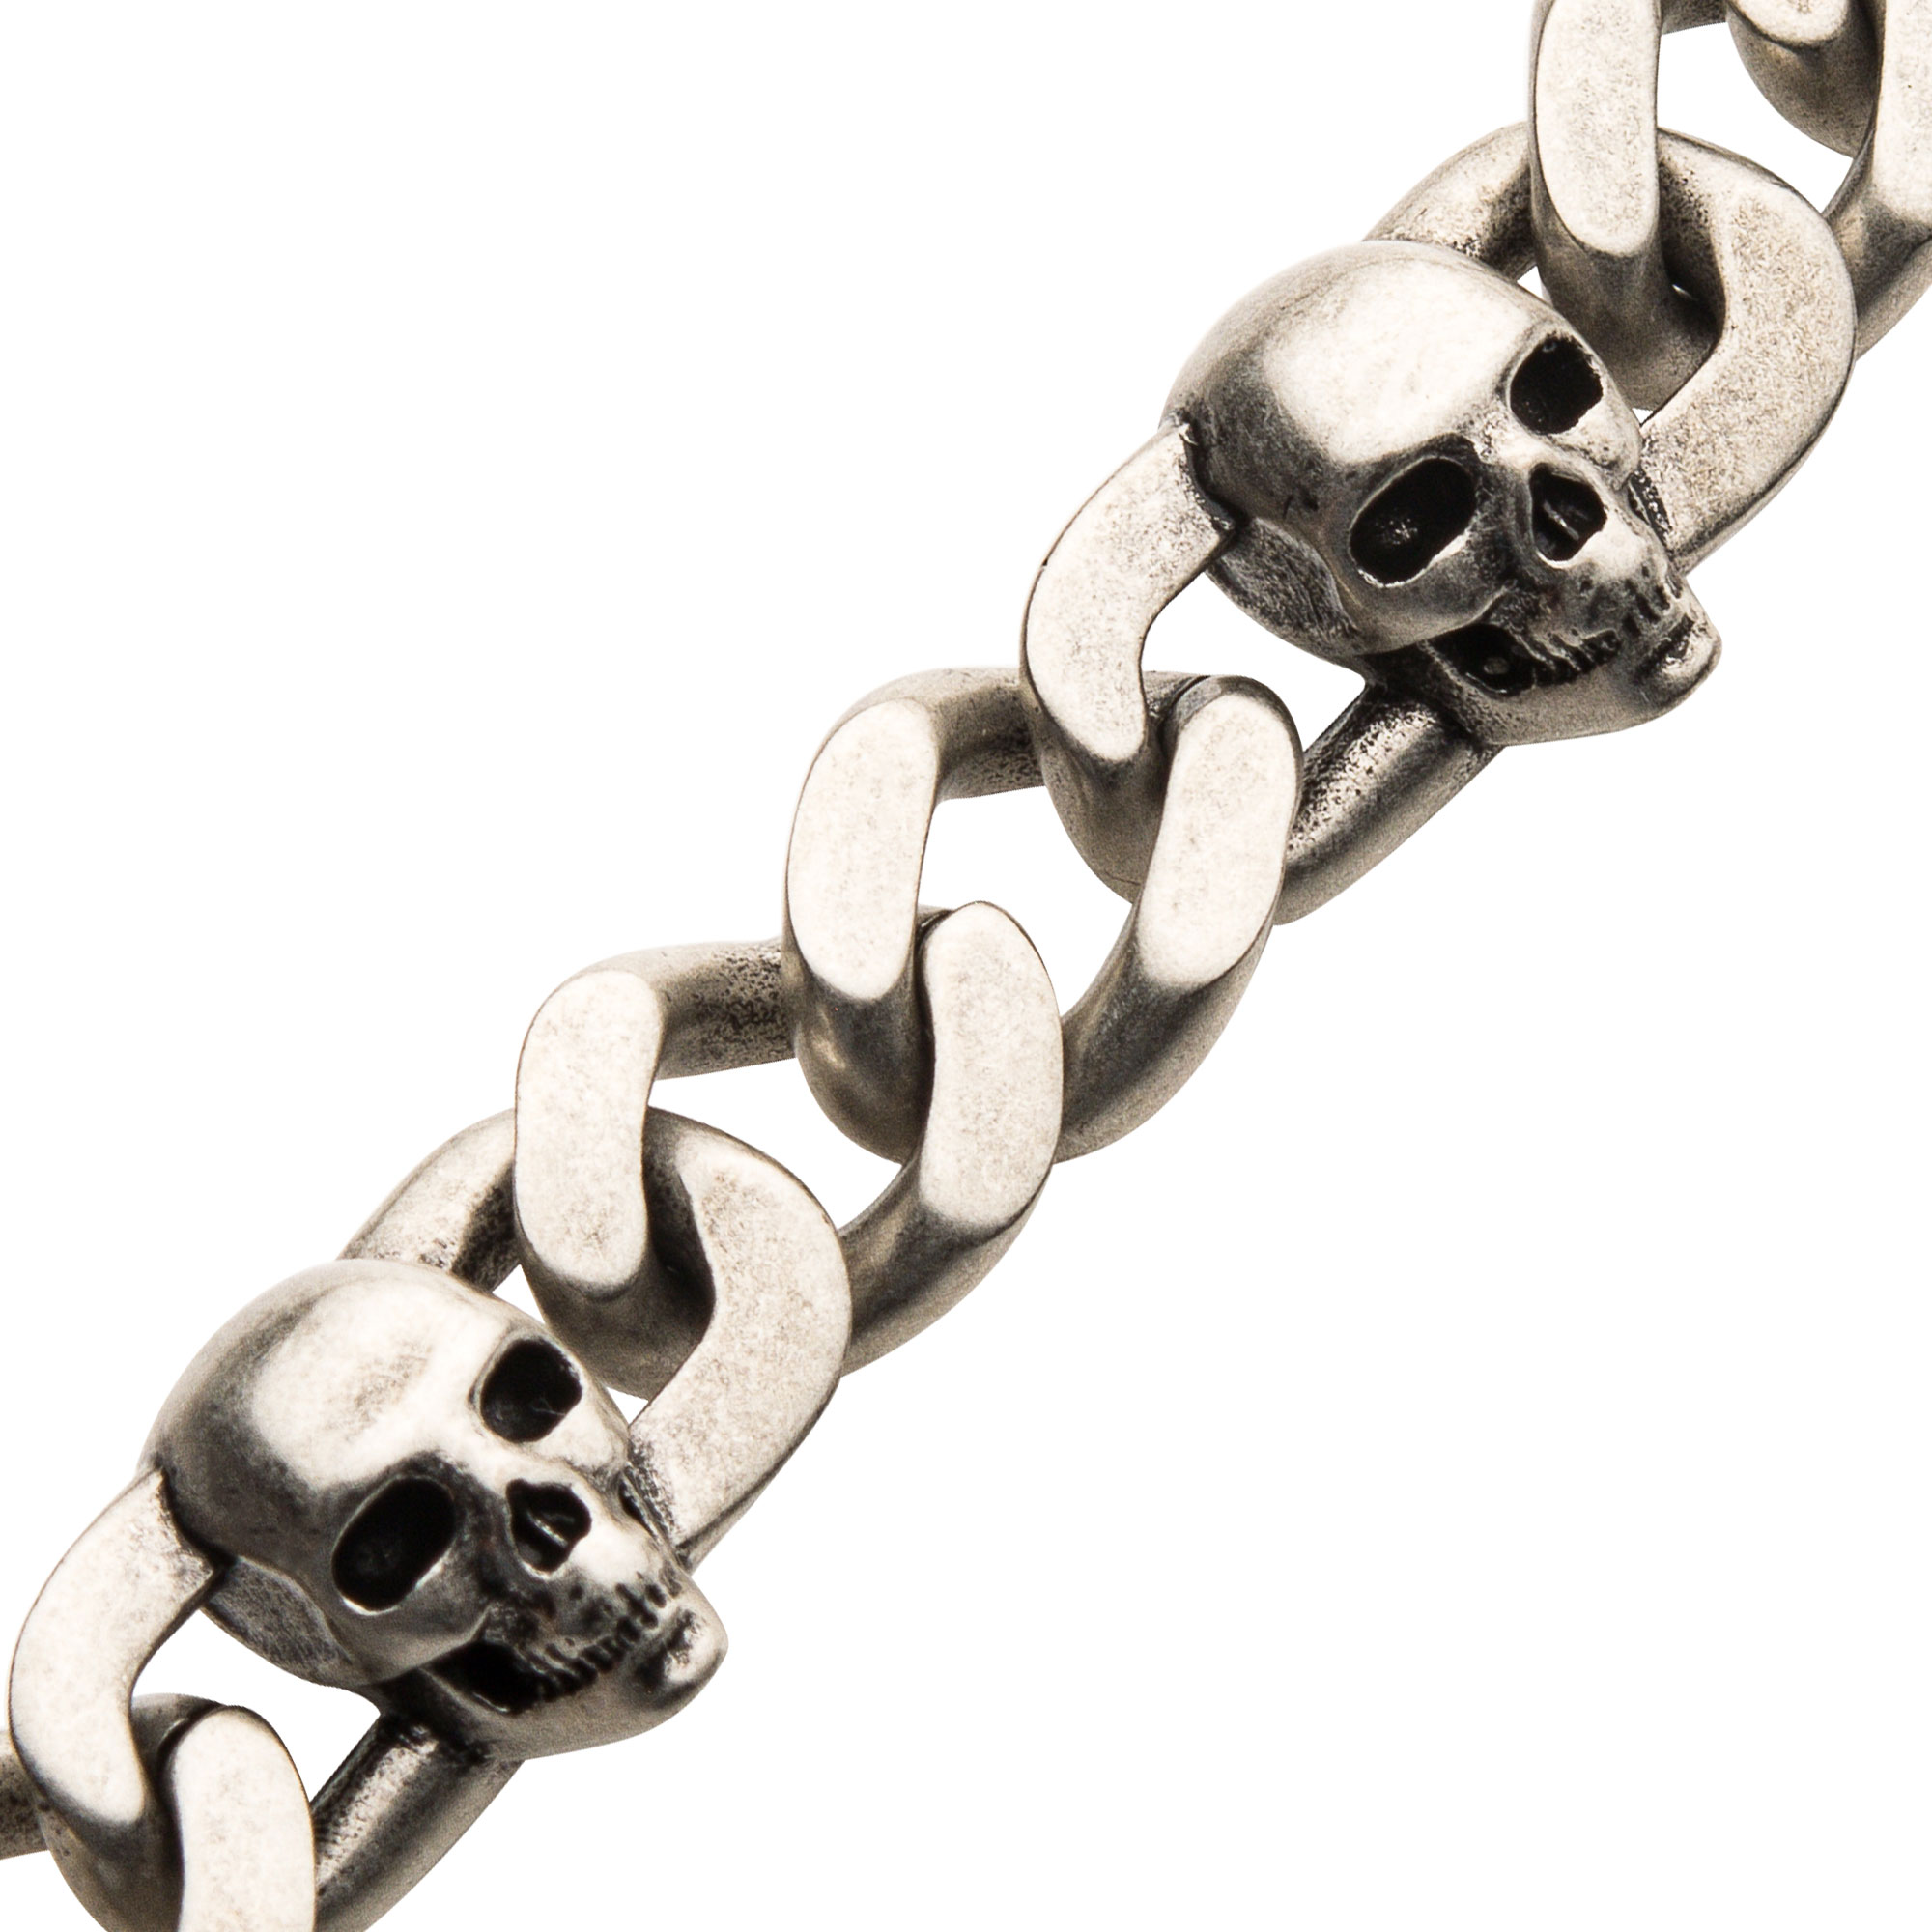 Stainless Steel Silver Plated with Skull Design Chunky Chain Bracelet Image 3 Glatz Jewelry Aliquippa, PA